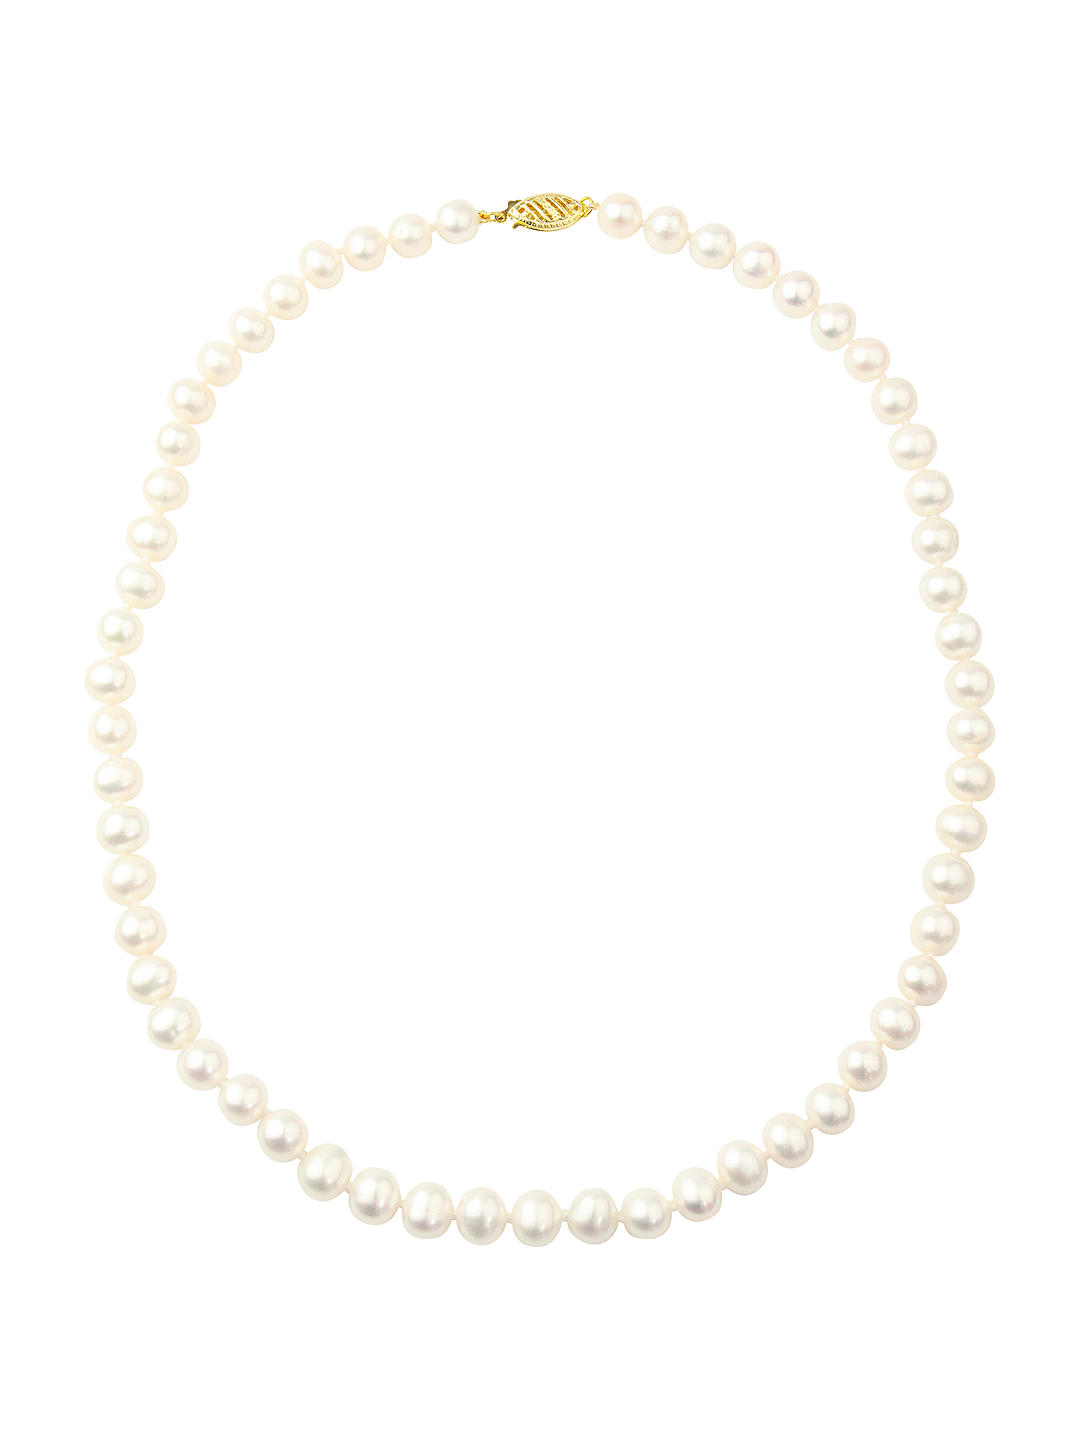 A B Davis 9ct Freshwater Pearl Necklace, White